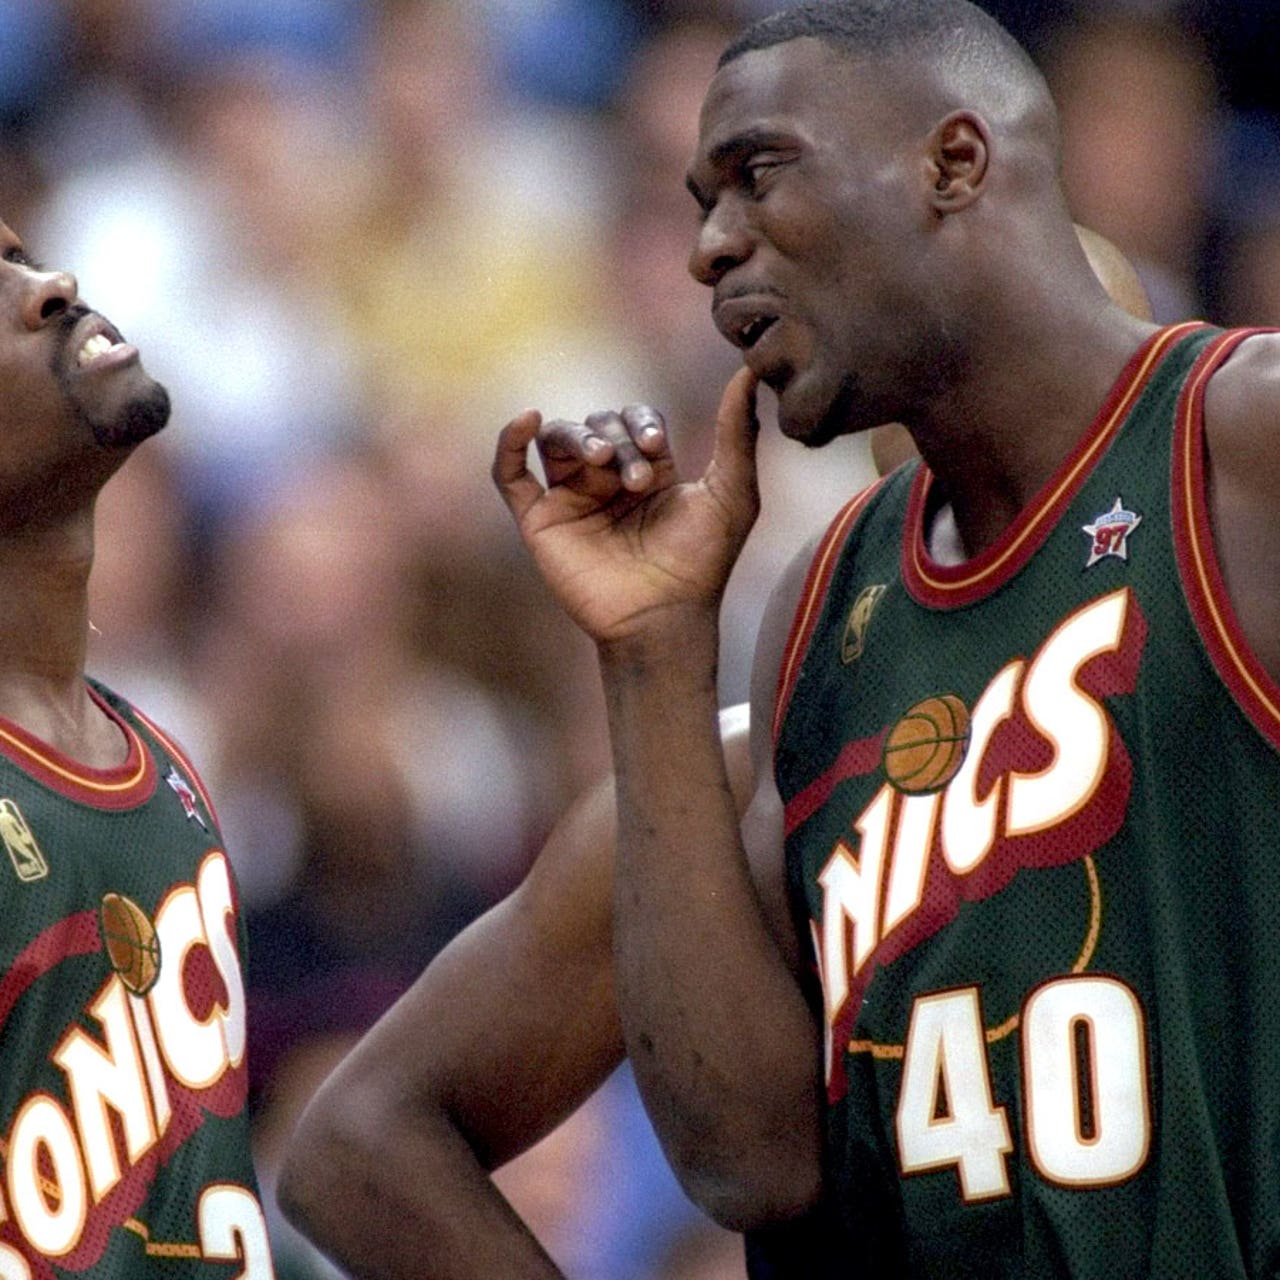 The 1996 Eastern Conference Finals Saw Shaquille O'Neal Threaten